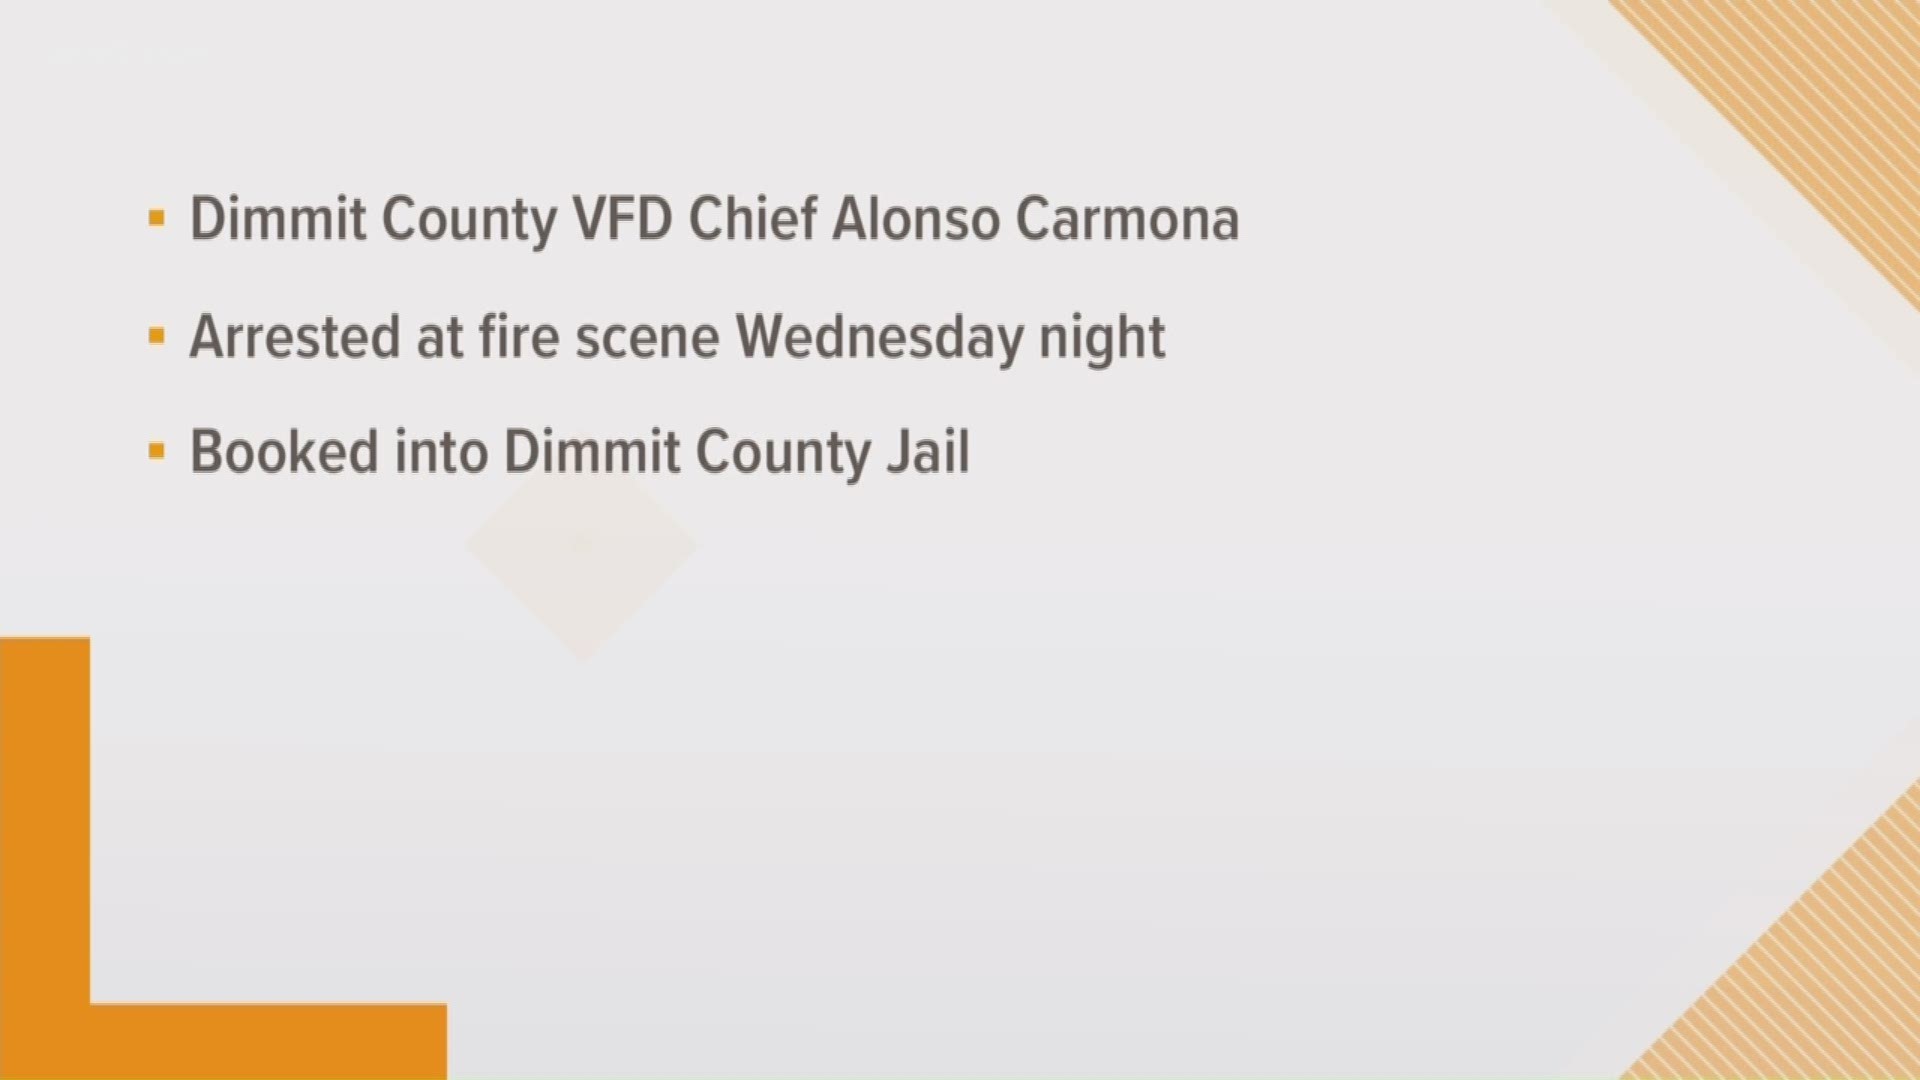 The fire chief of Dimmit County was arrested overnight for allegedly "interfering."